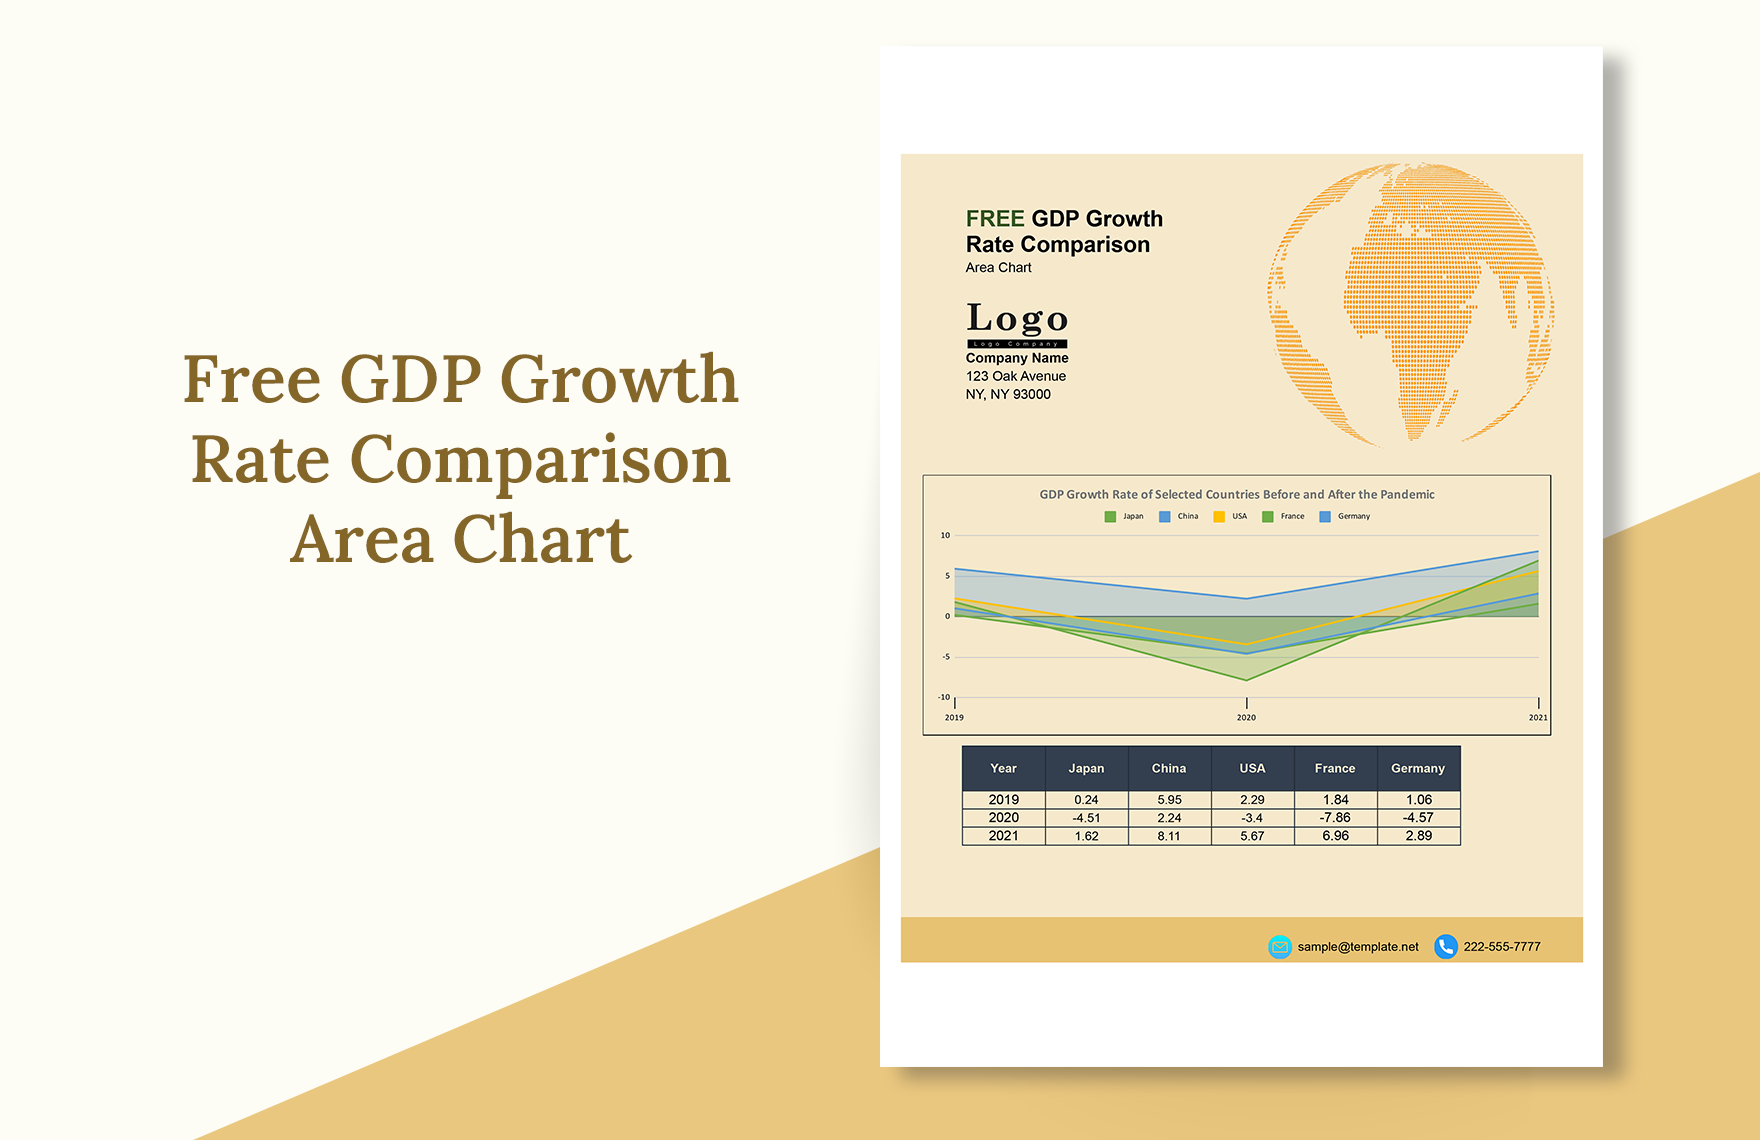 GDP Growth Rate Comparison Area Chart